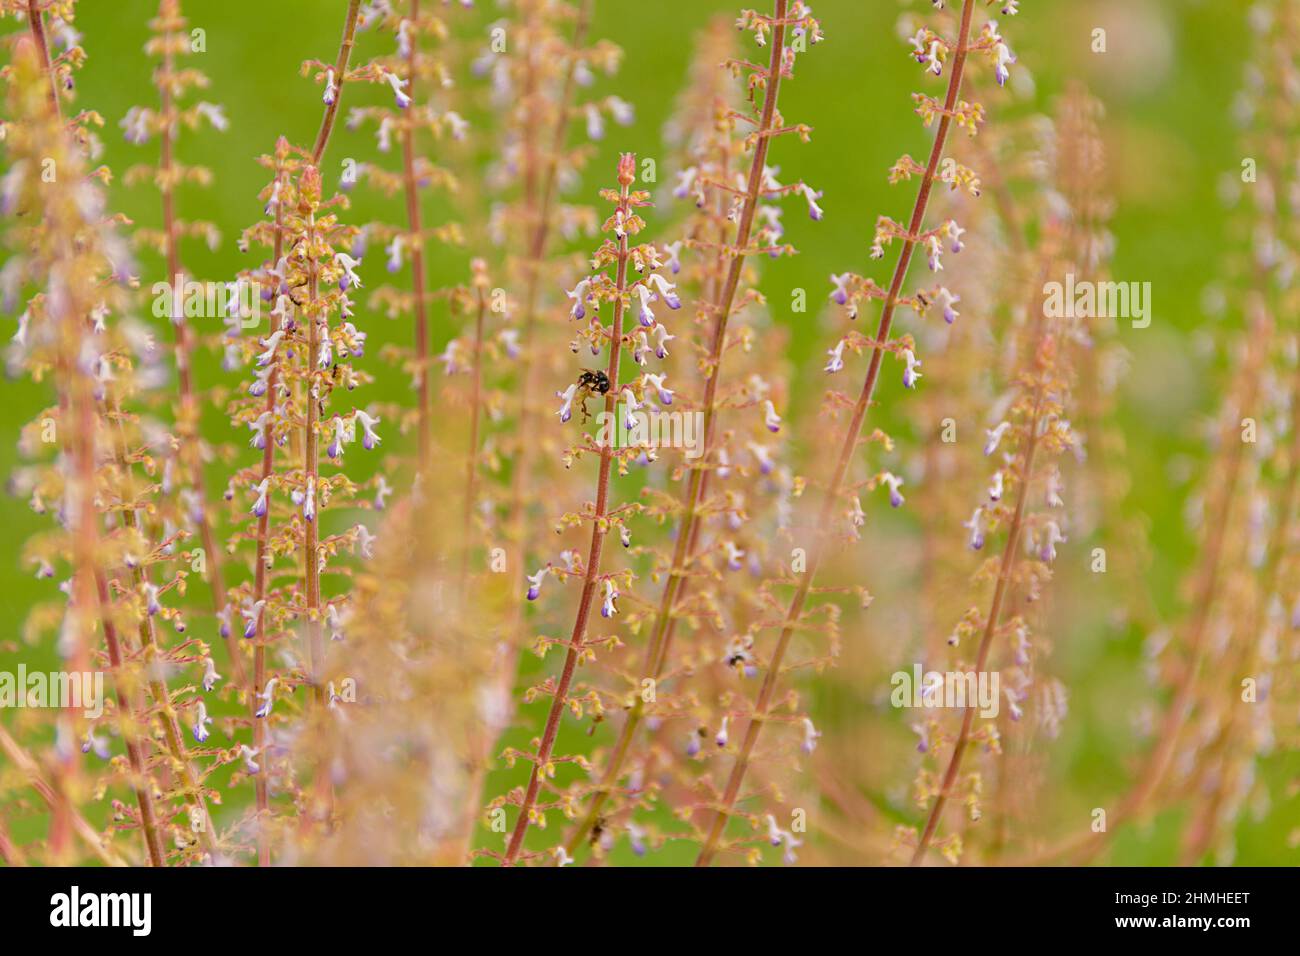 Goiânia, Goias, Brazil – January 30, 2022: Delicate flowering branches with green grass in the background. Stock Photo